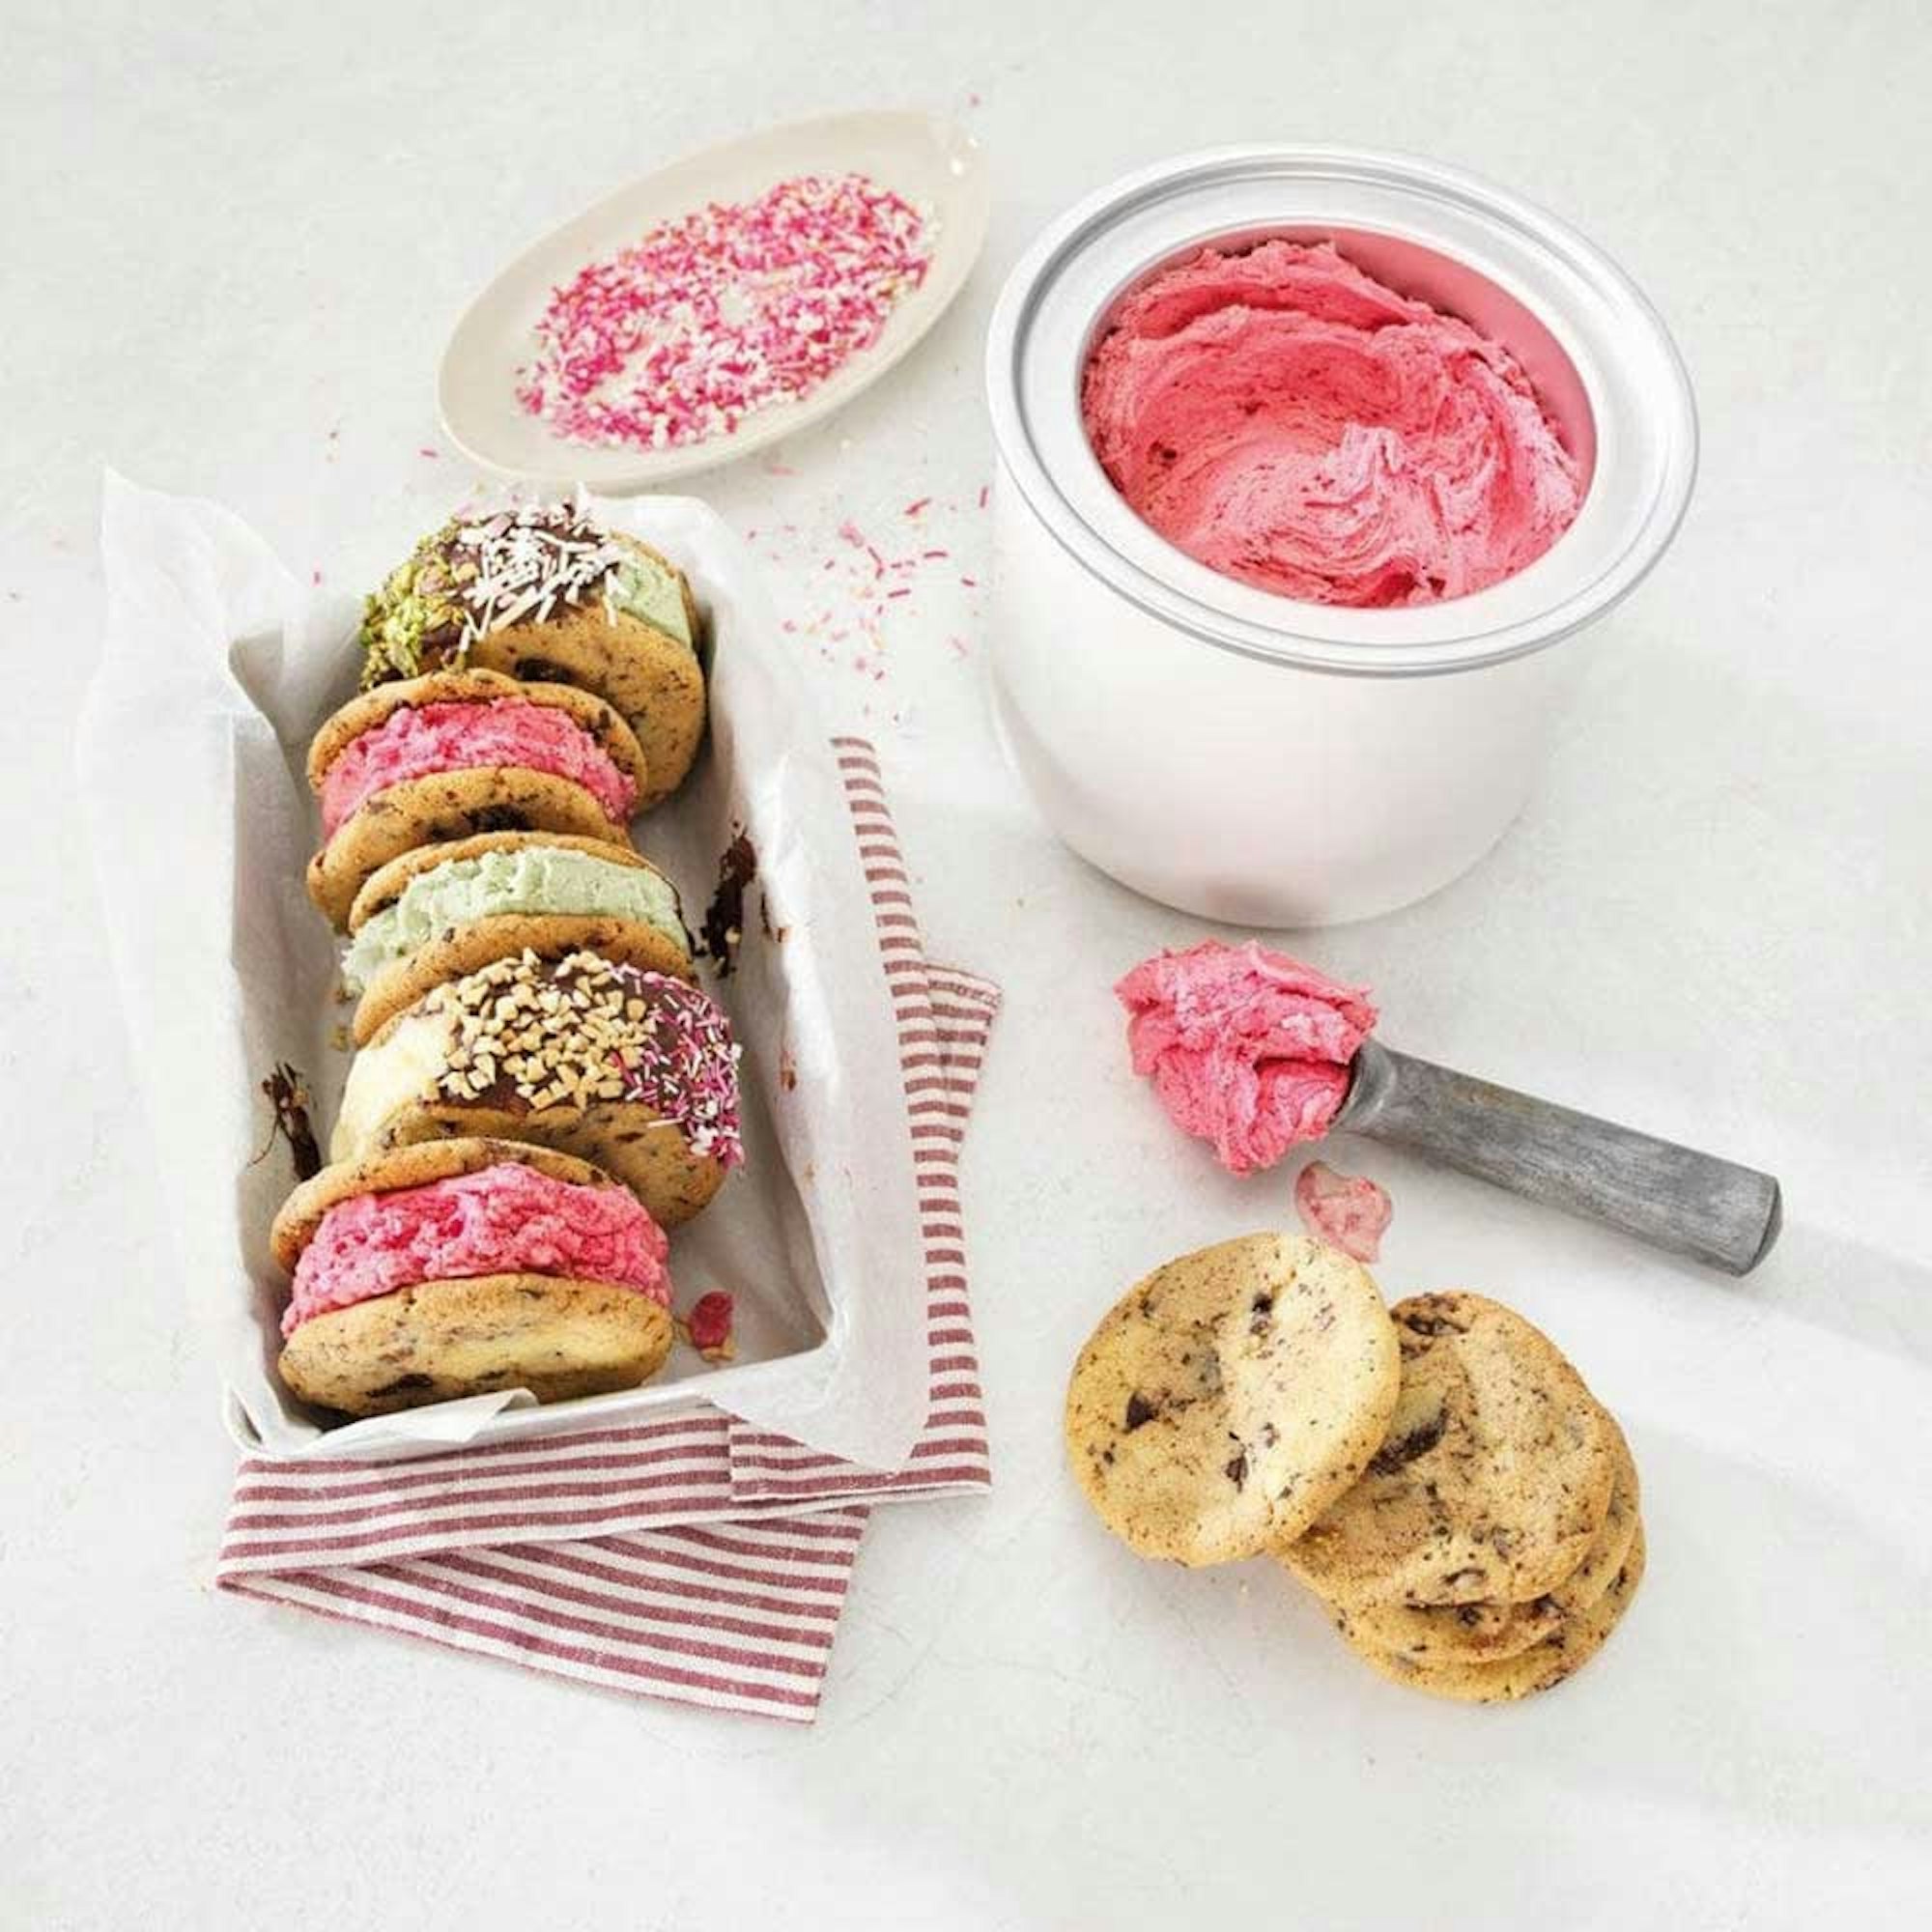 How to make Summer Desserts at Home? Robins Kitchen log. ice cream sandwiches with strawberry ice cream tub and cookies